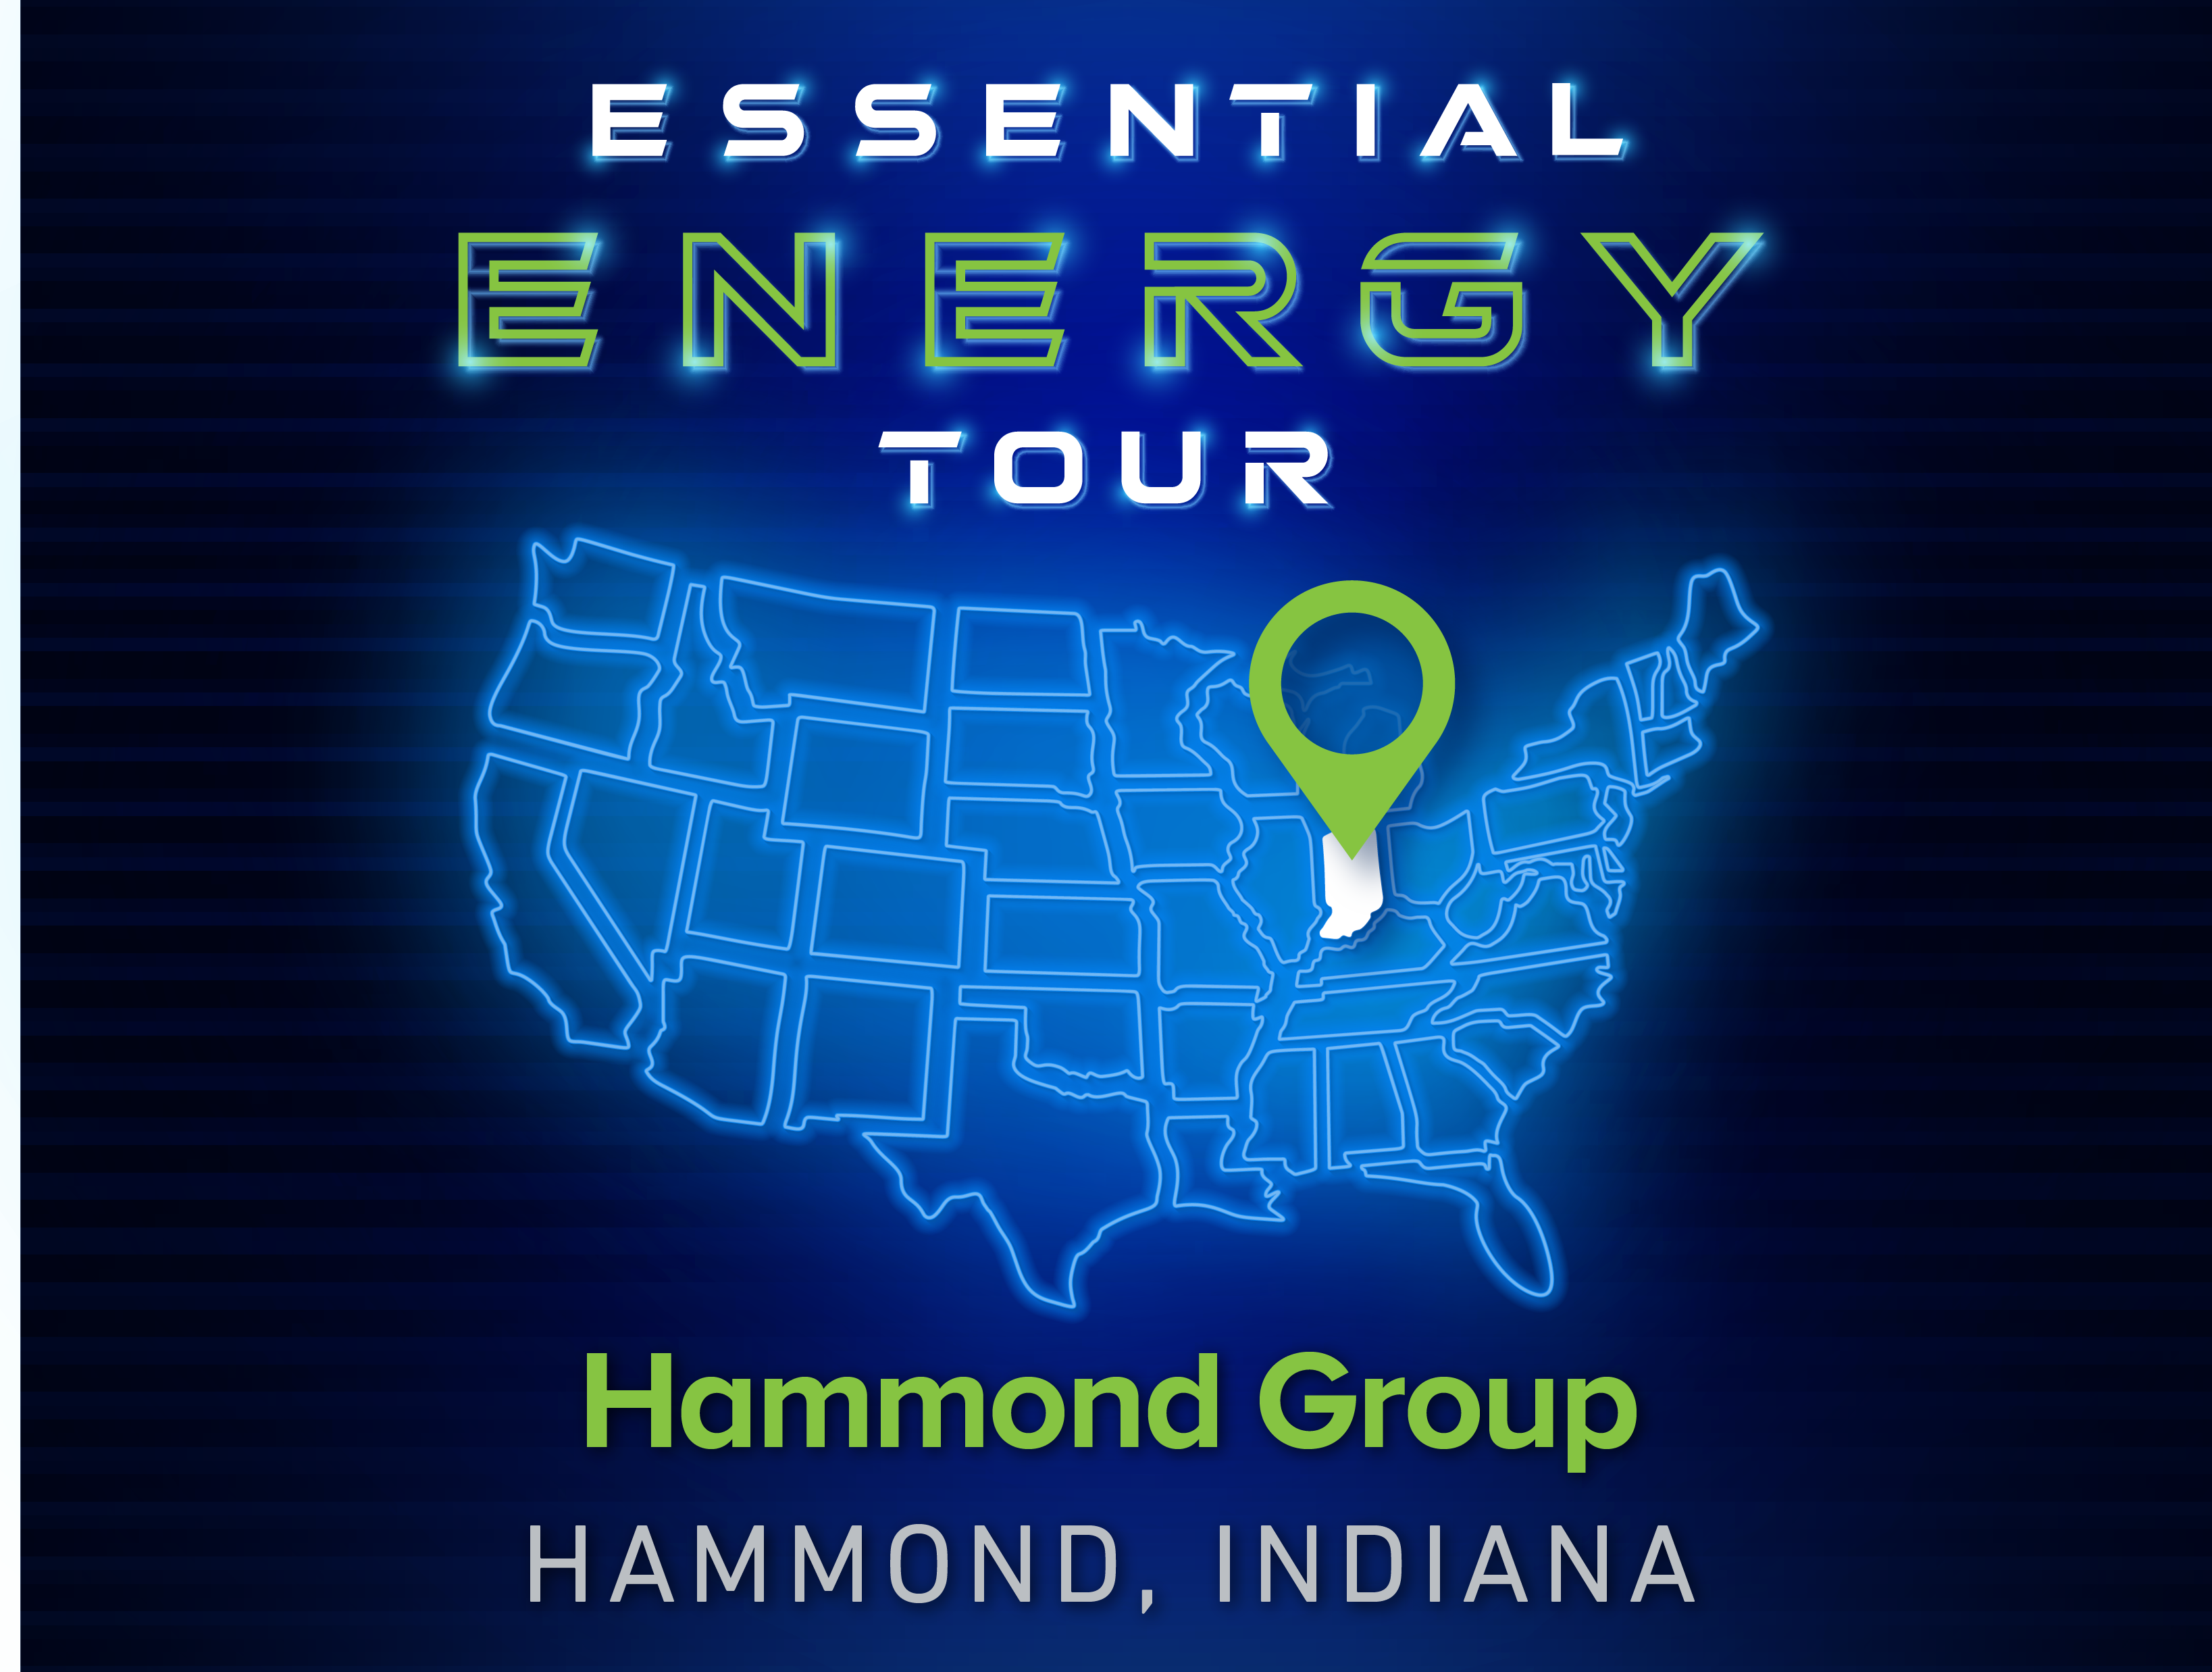 Essential Energy Tour of Hammond Group